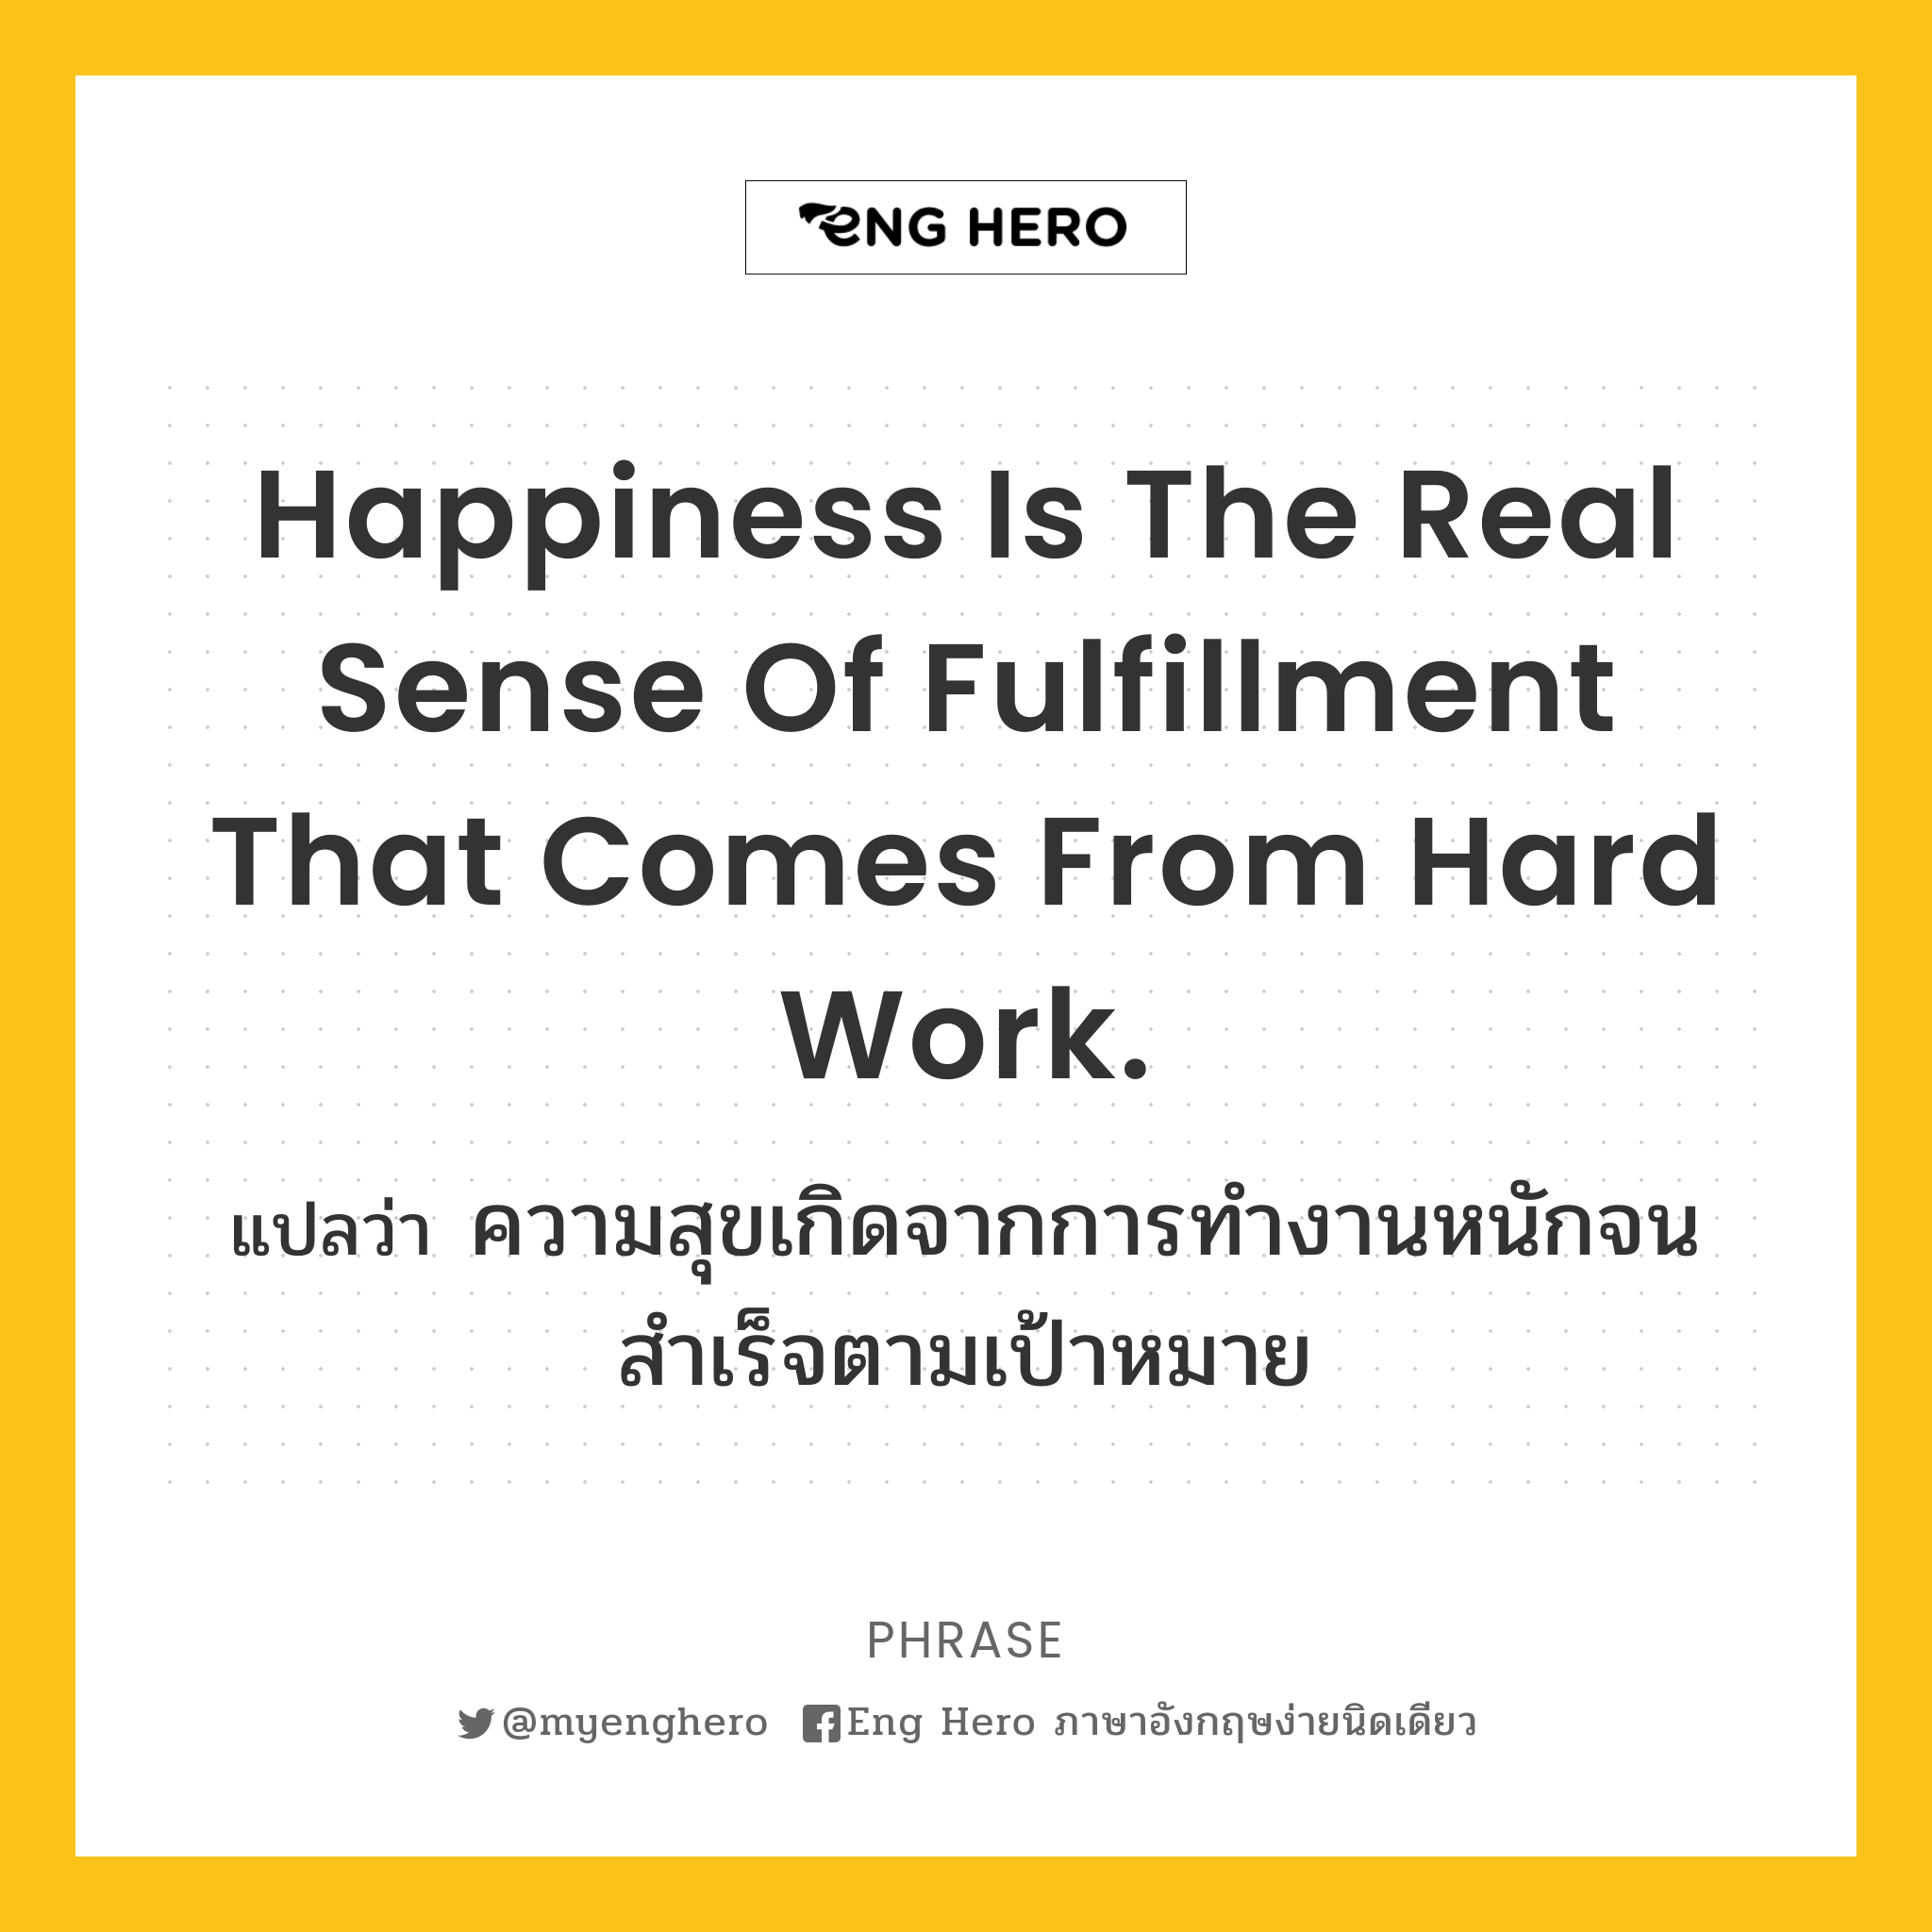 Happiness is the real sense of fulfillment that comes from hard work.